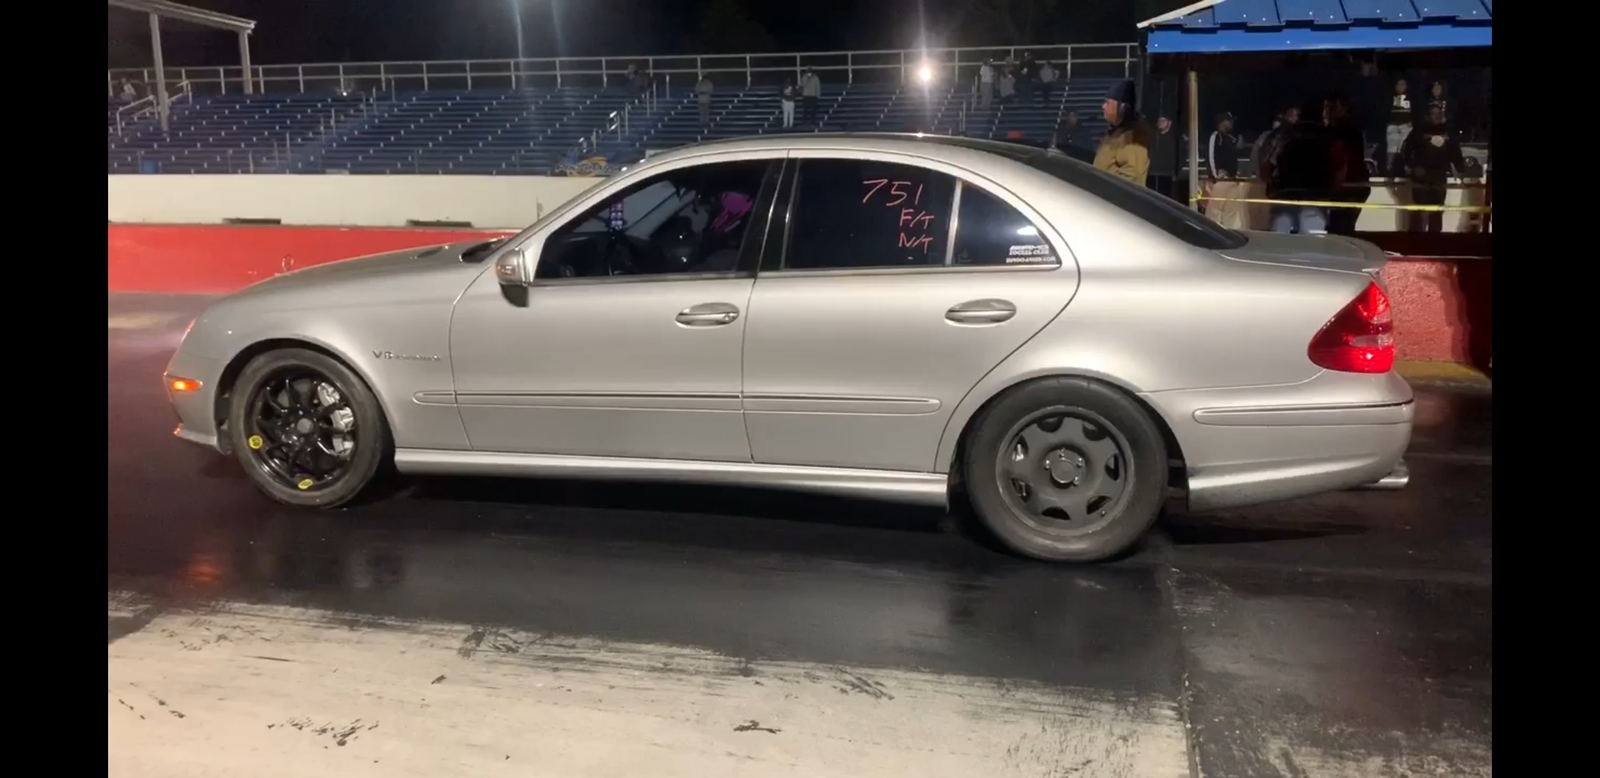 2005 Silver Mercedes-Benz E55 AMG Eurocharged  picture, mods, upgrades